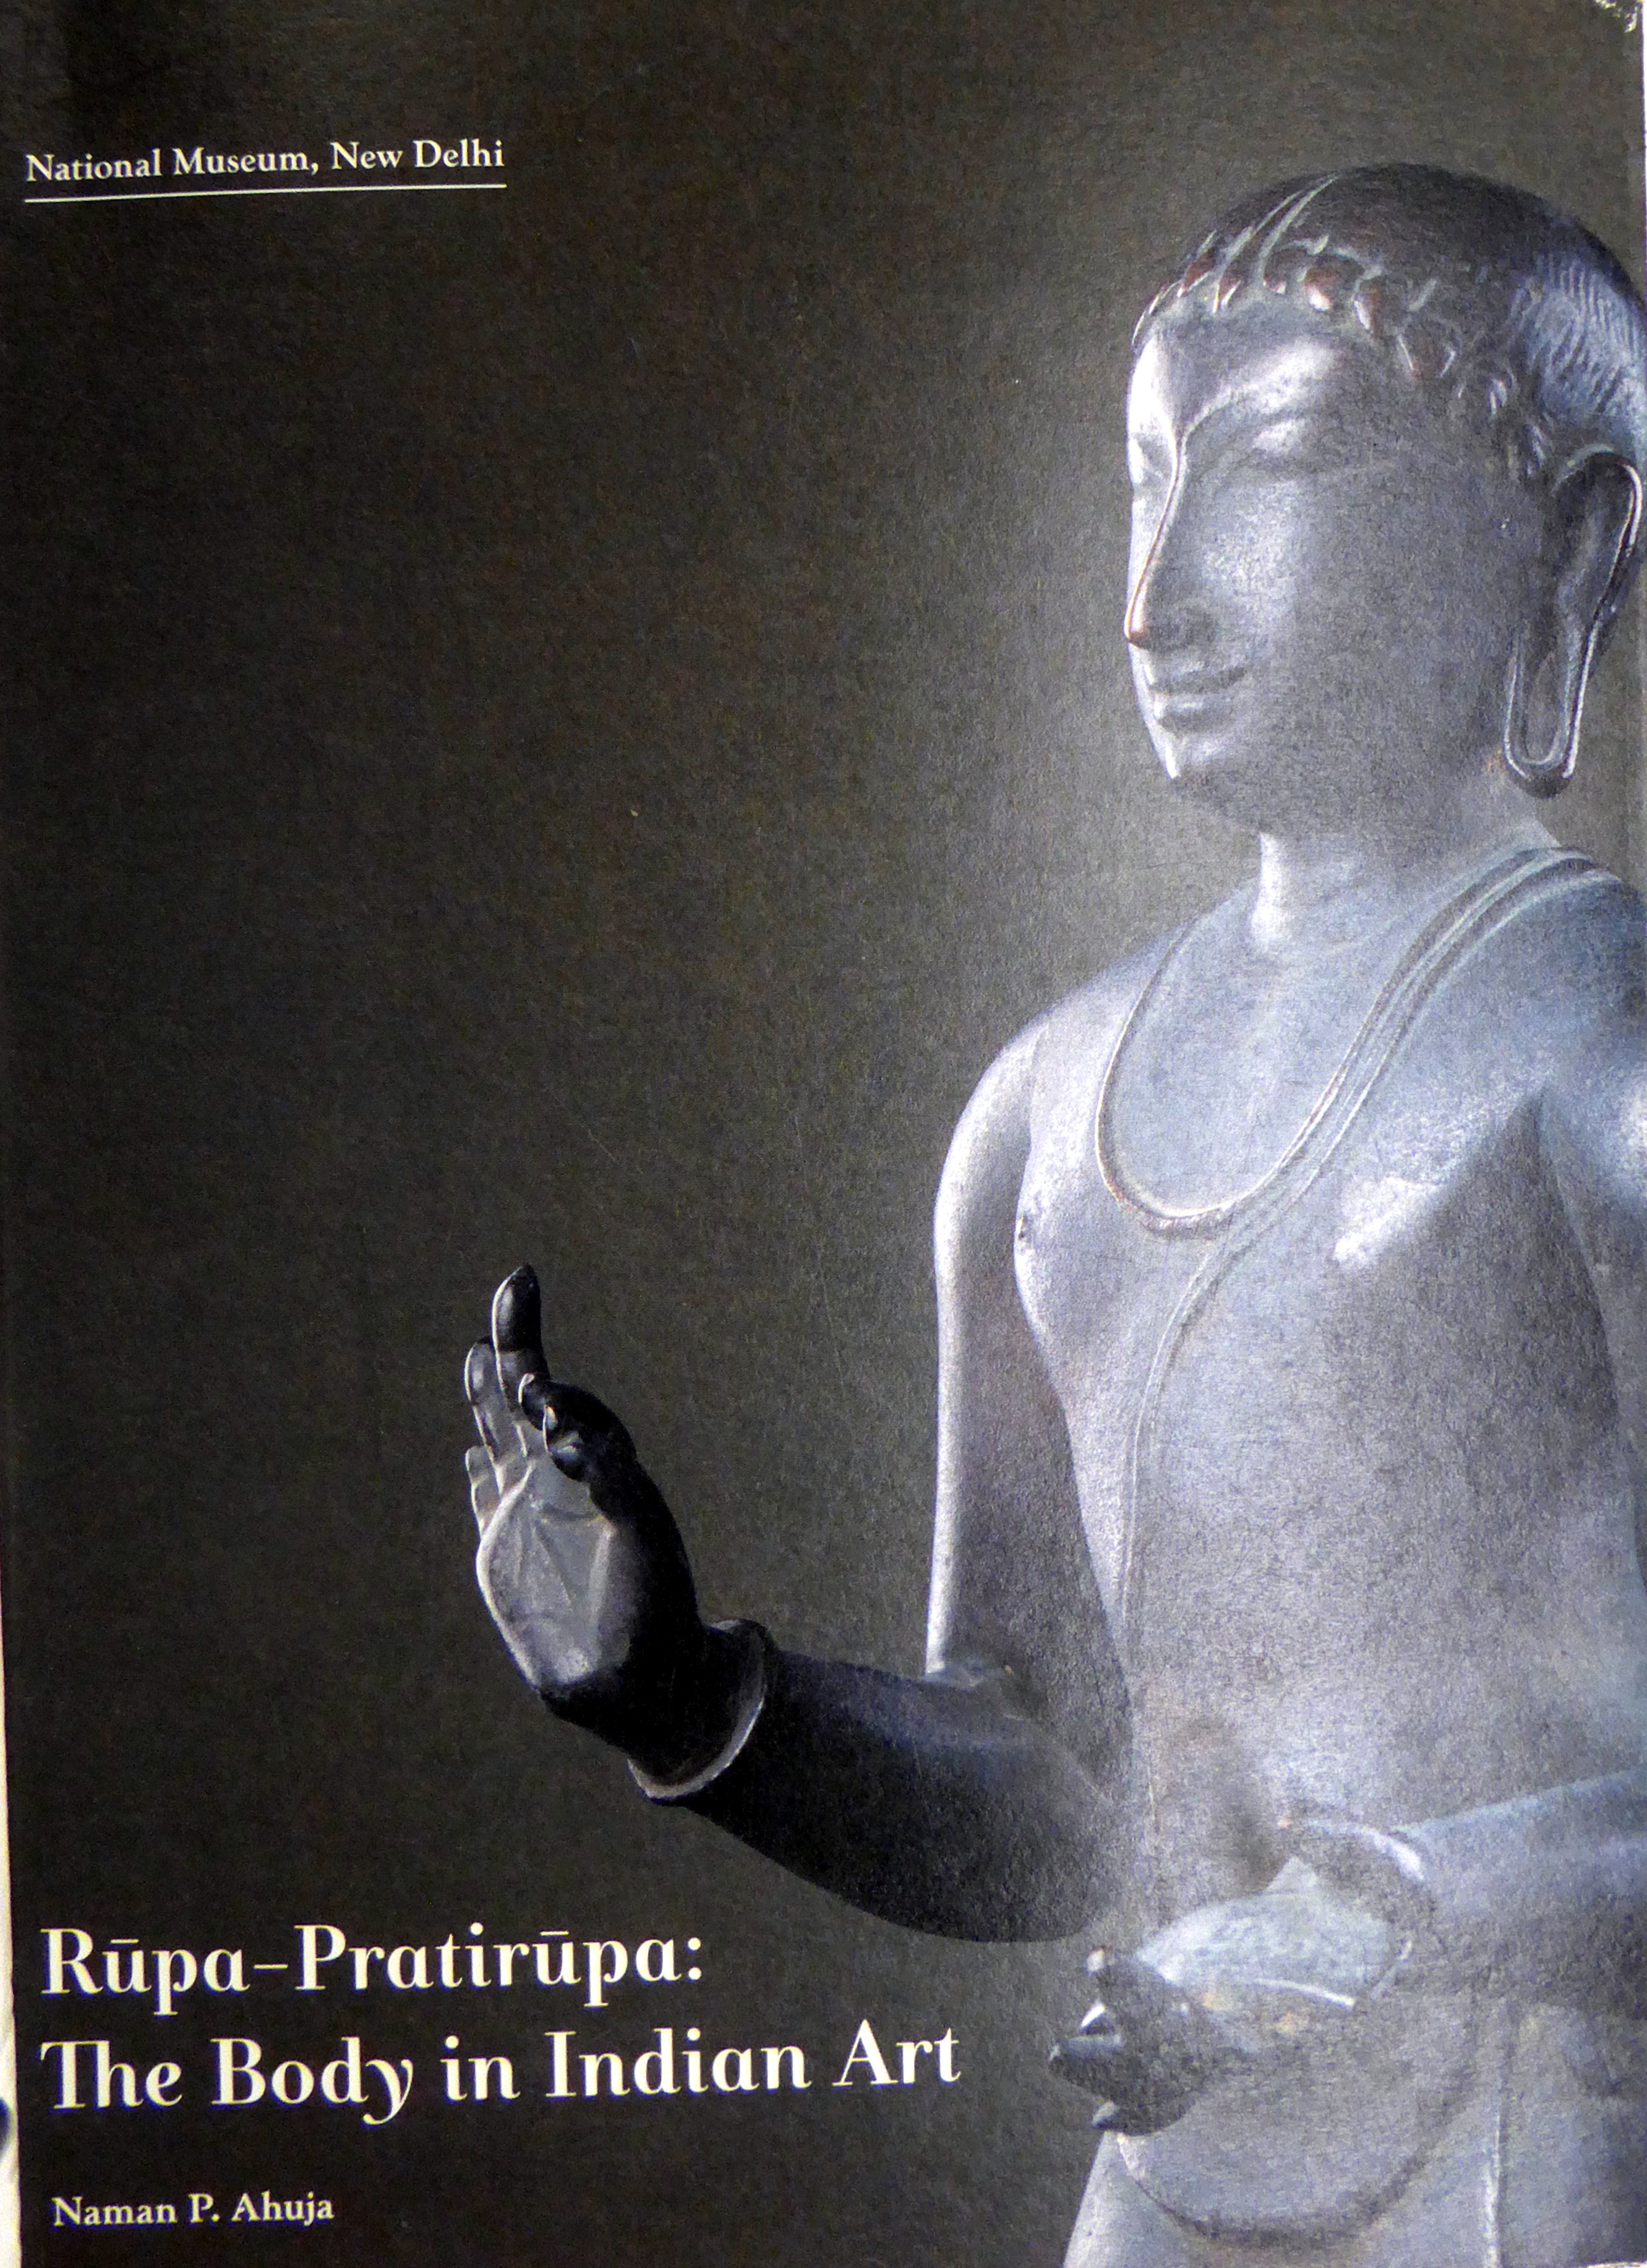 the body in Indian art